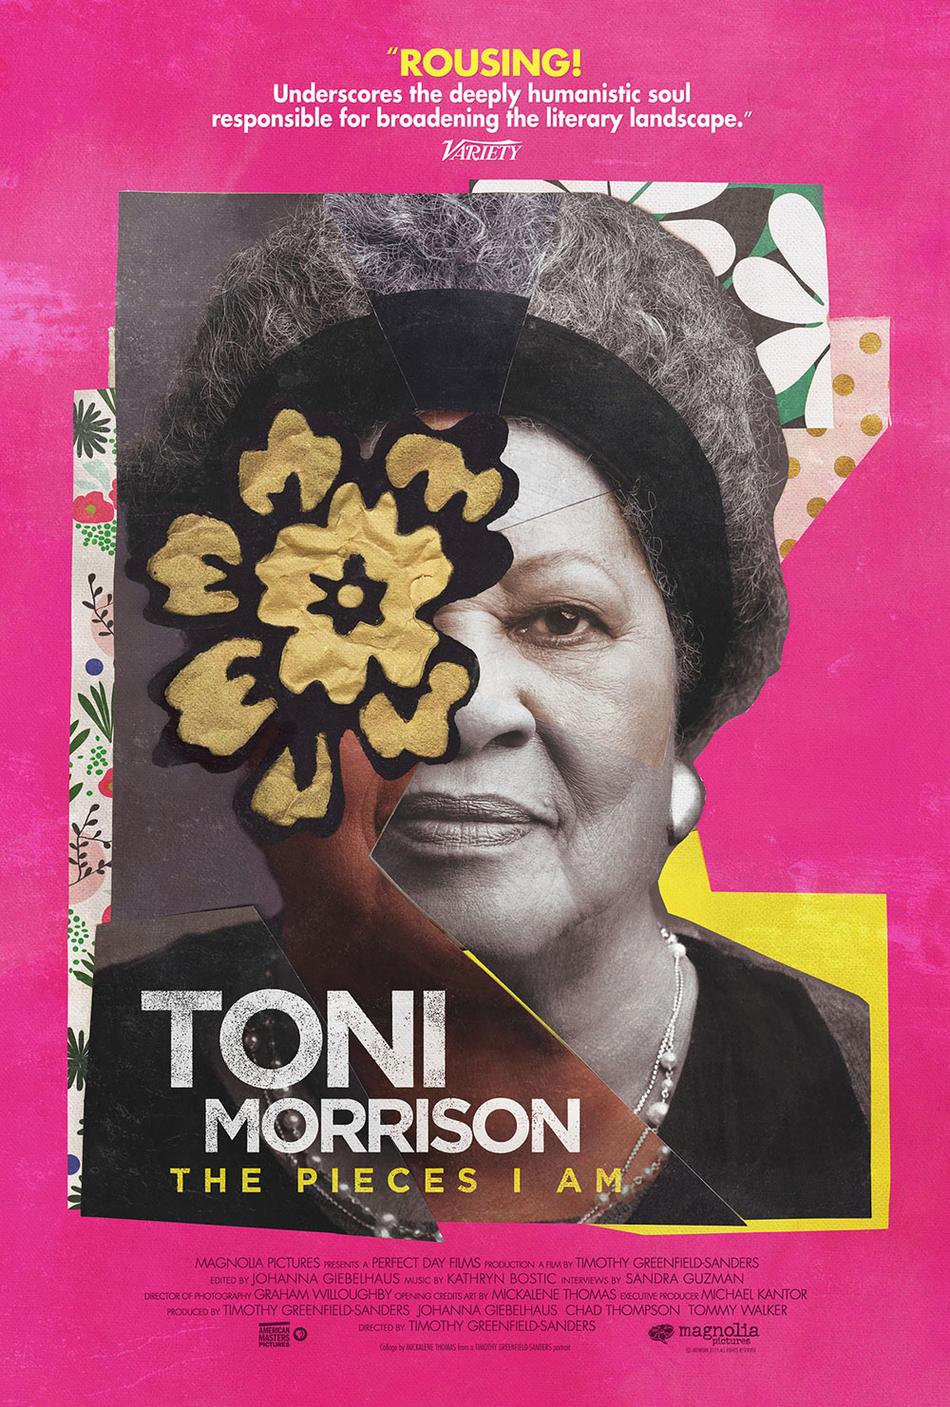 Poster of Magnolia Pictures' "Toni Morrison: The Pieces I Am" with art by Mickalene Thomas, photo by Timothy Greenfield-Sanders